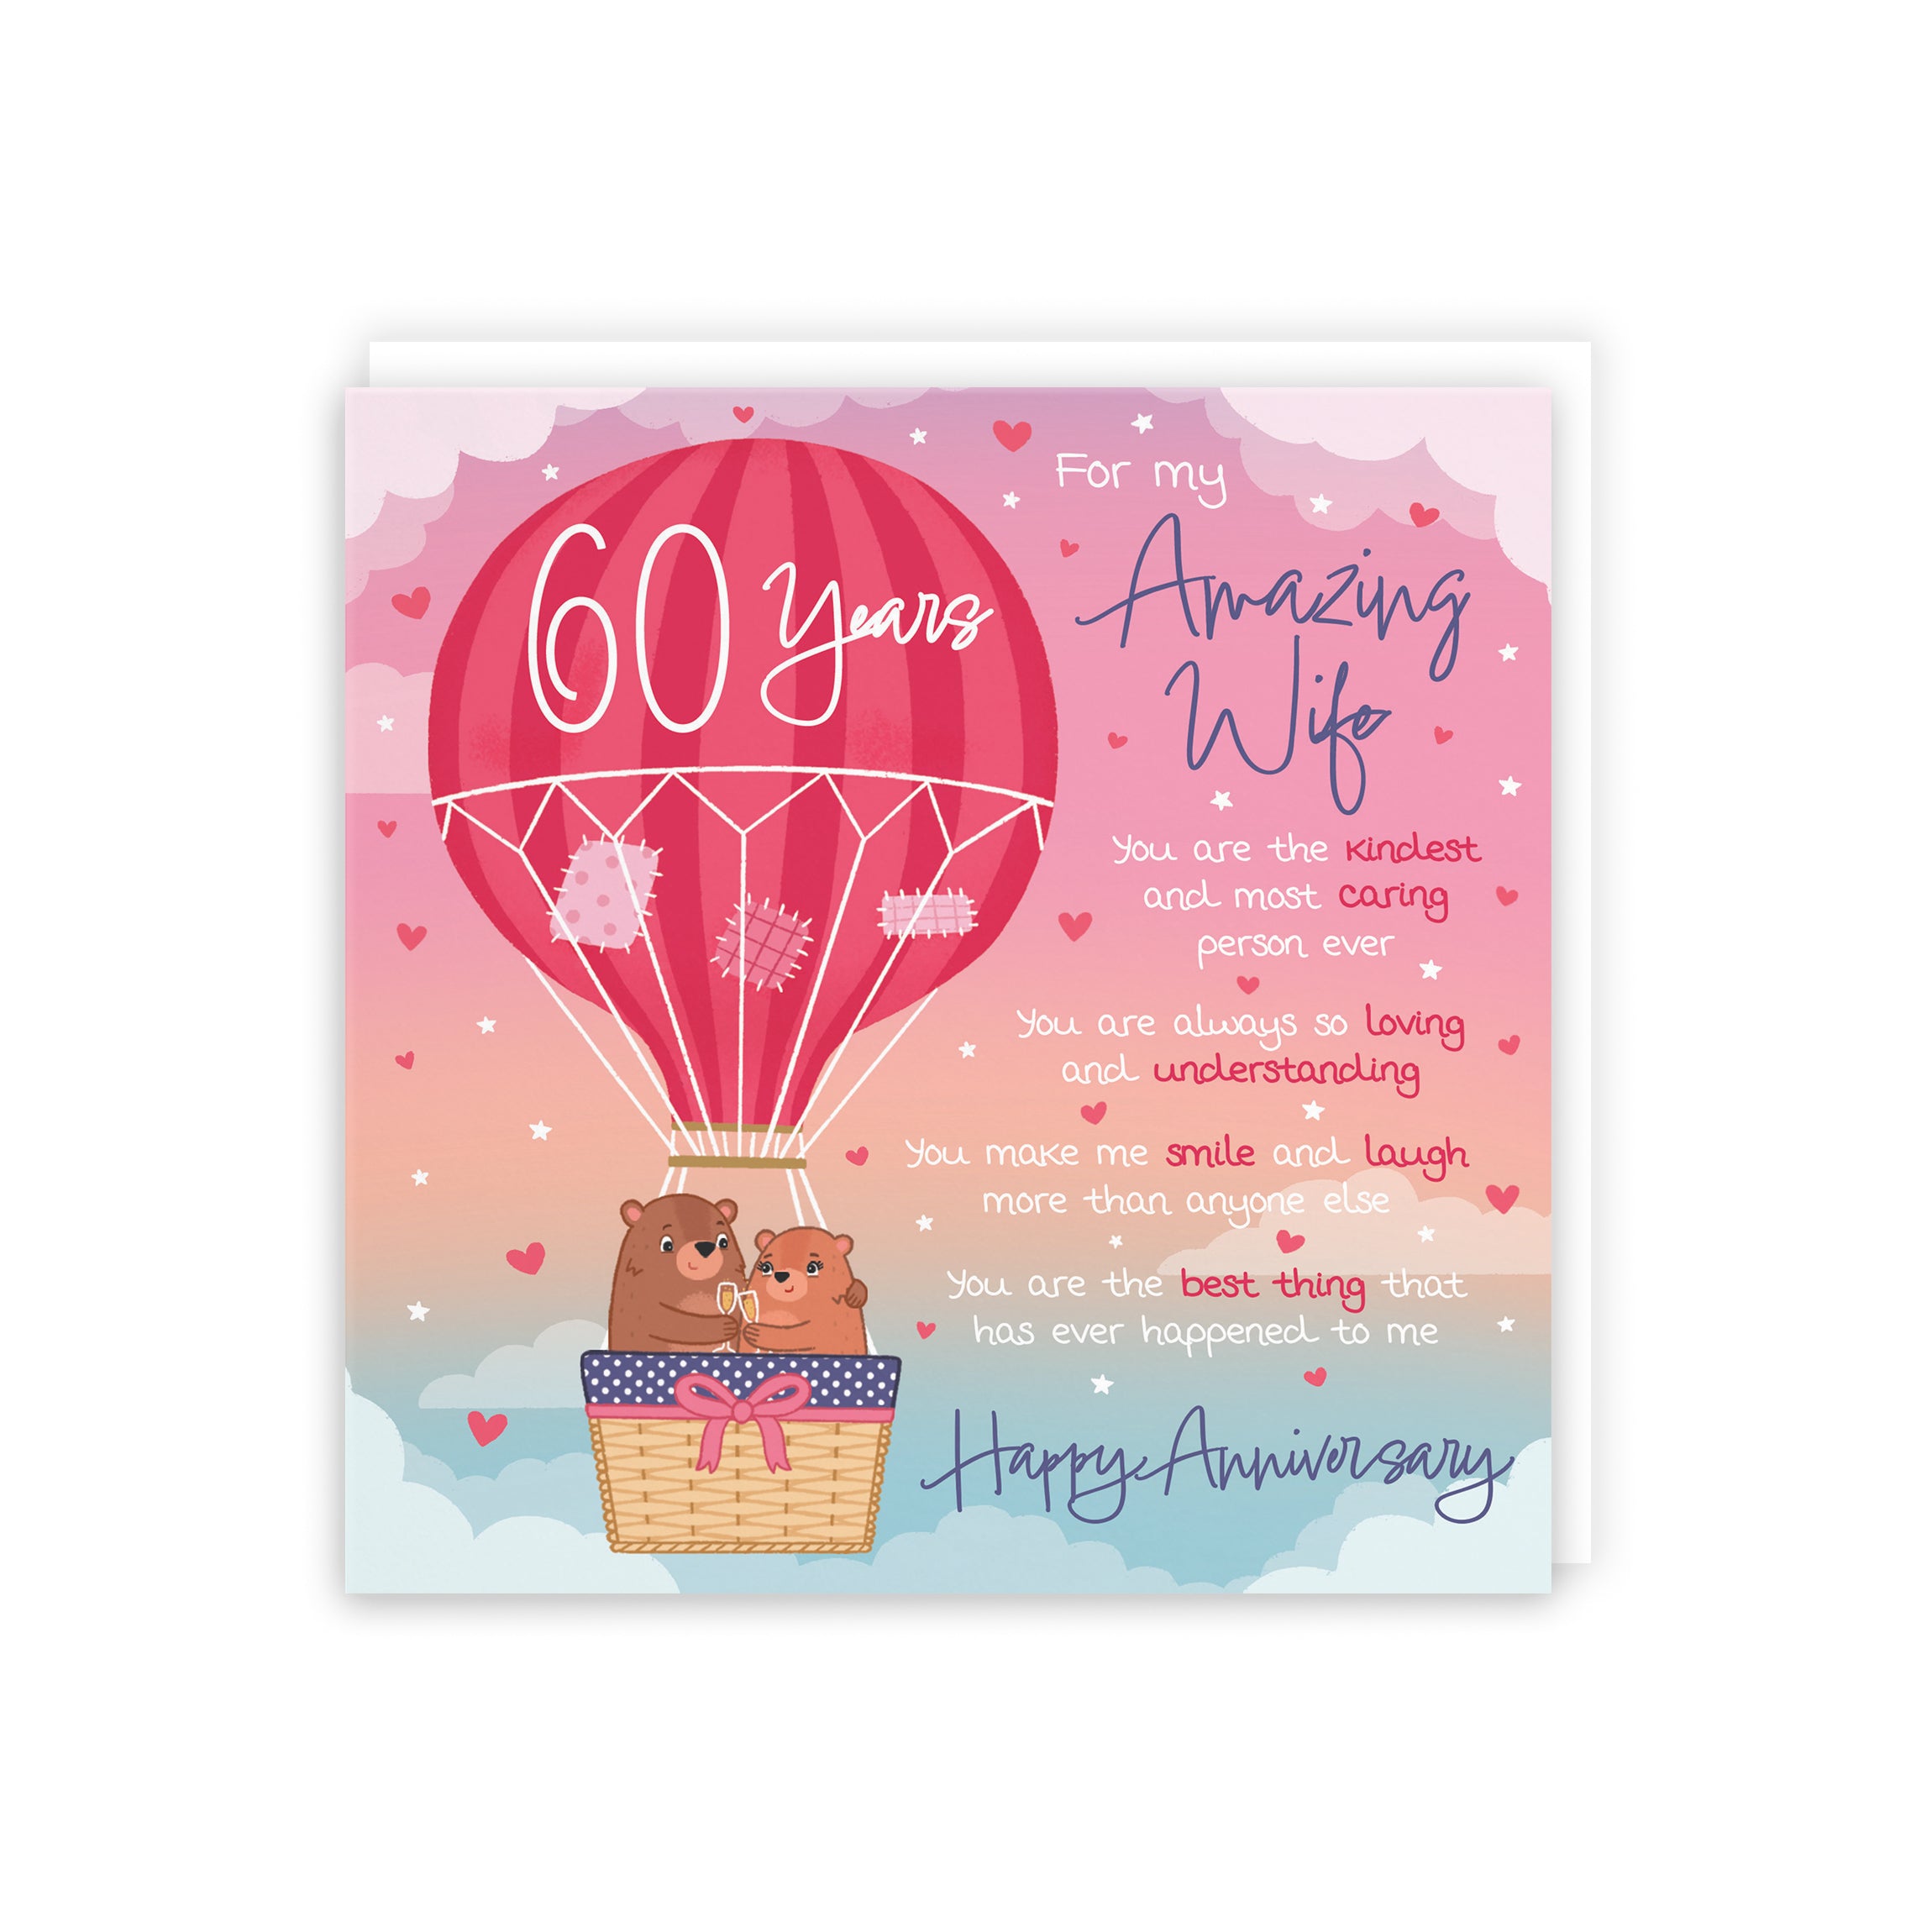 Wife 60th Anniversary Poem Card Love Is In The Air Cute Bears